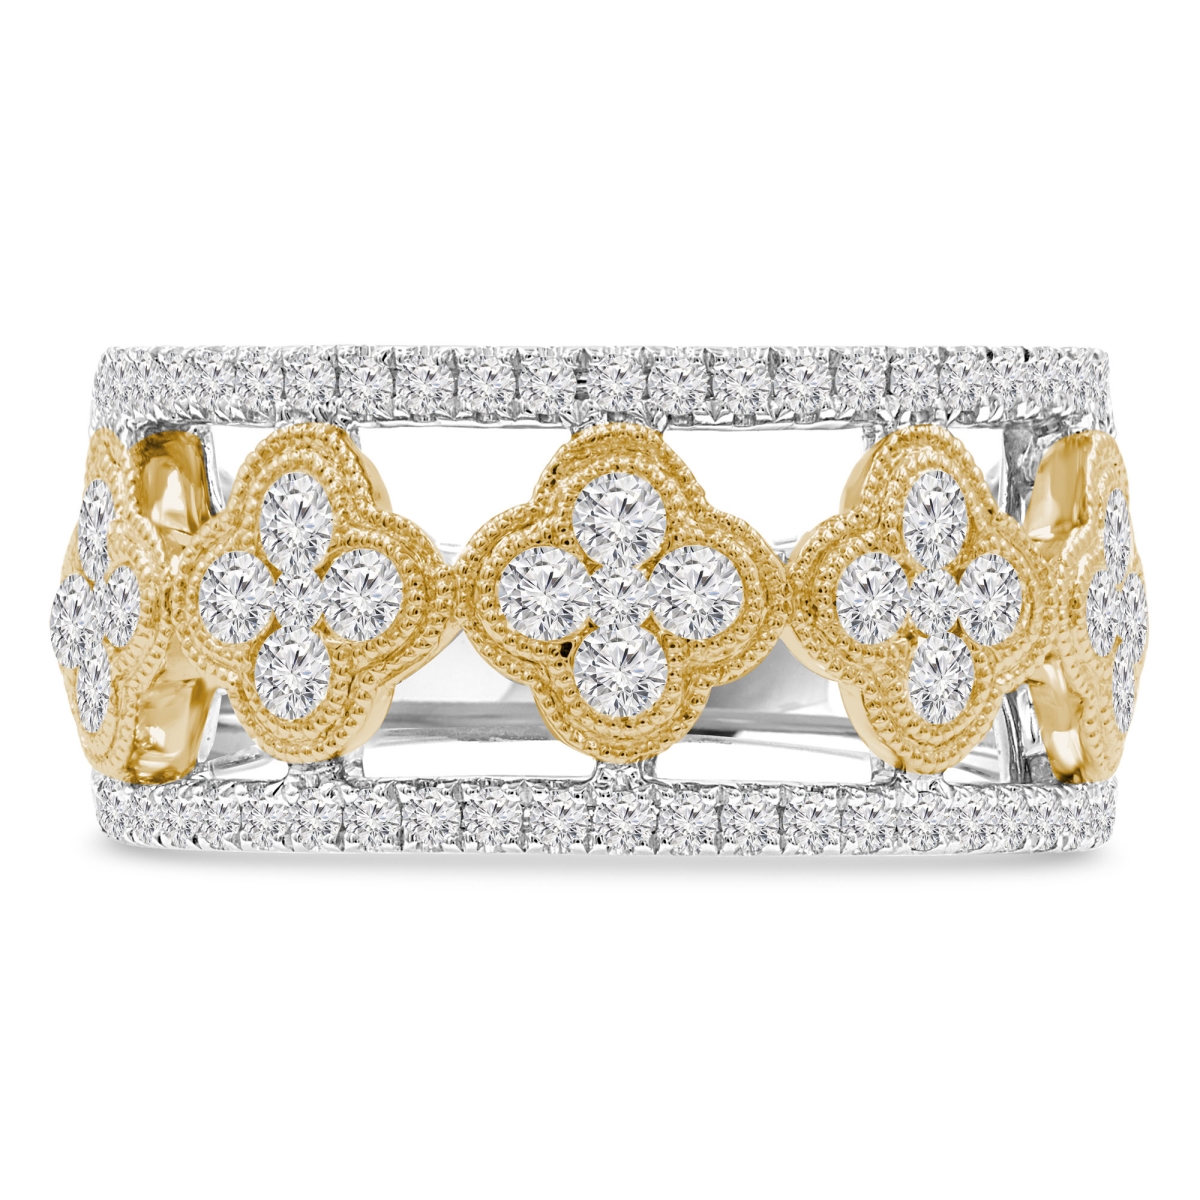 Picture of Majesty Diamonds MDR210140-P 1 CTW Round Diamond Cocktail Ring in 14K Two-Tone Gold